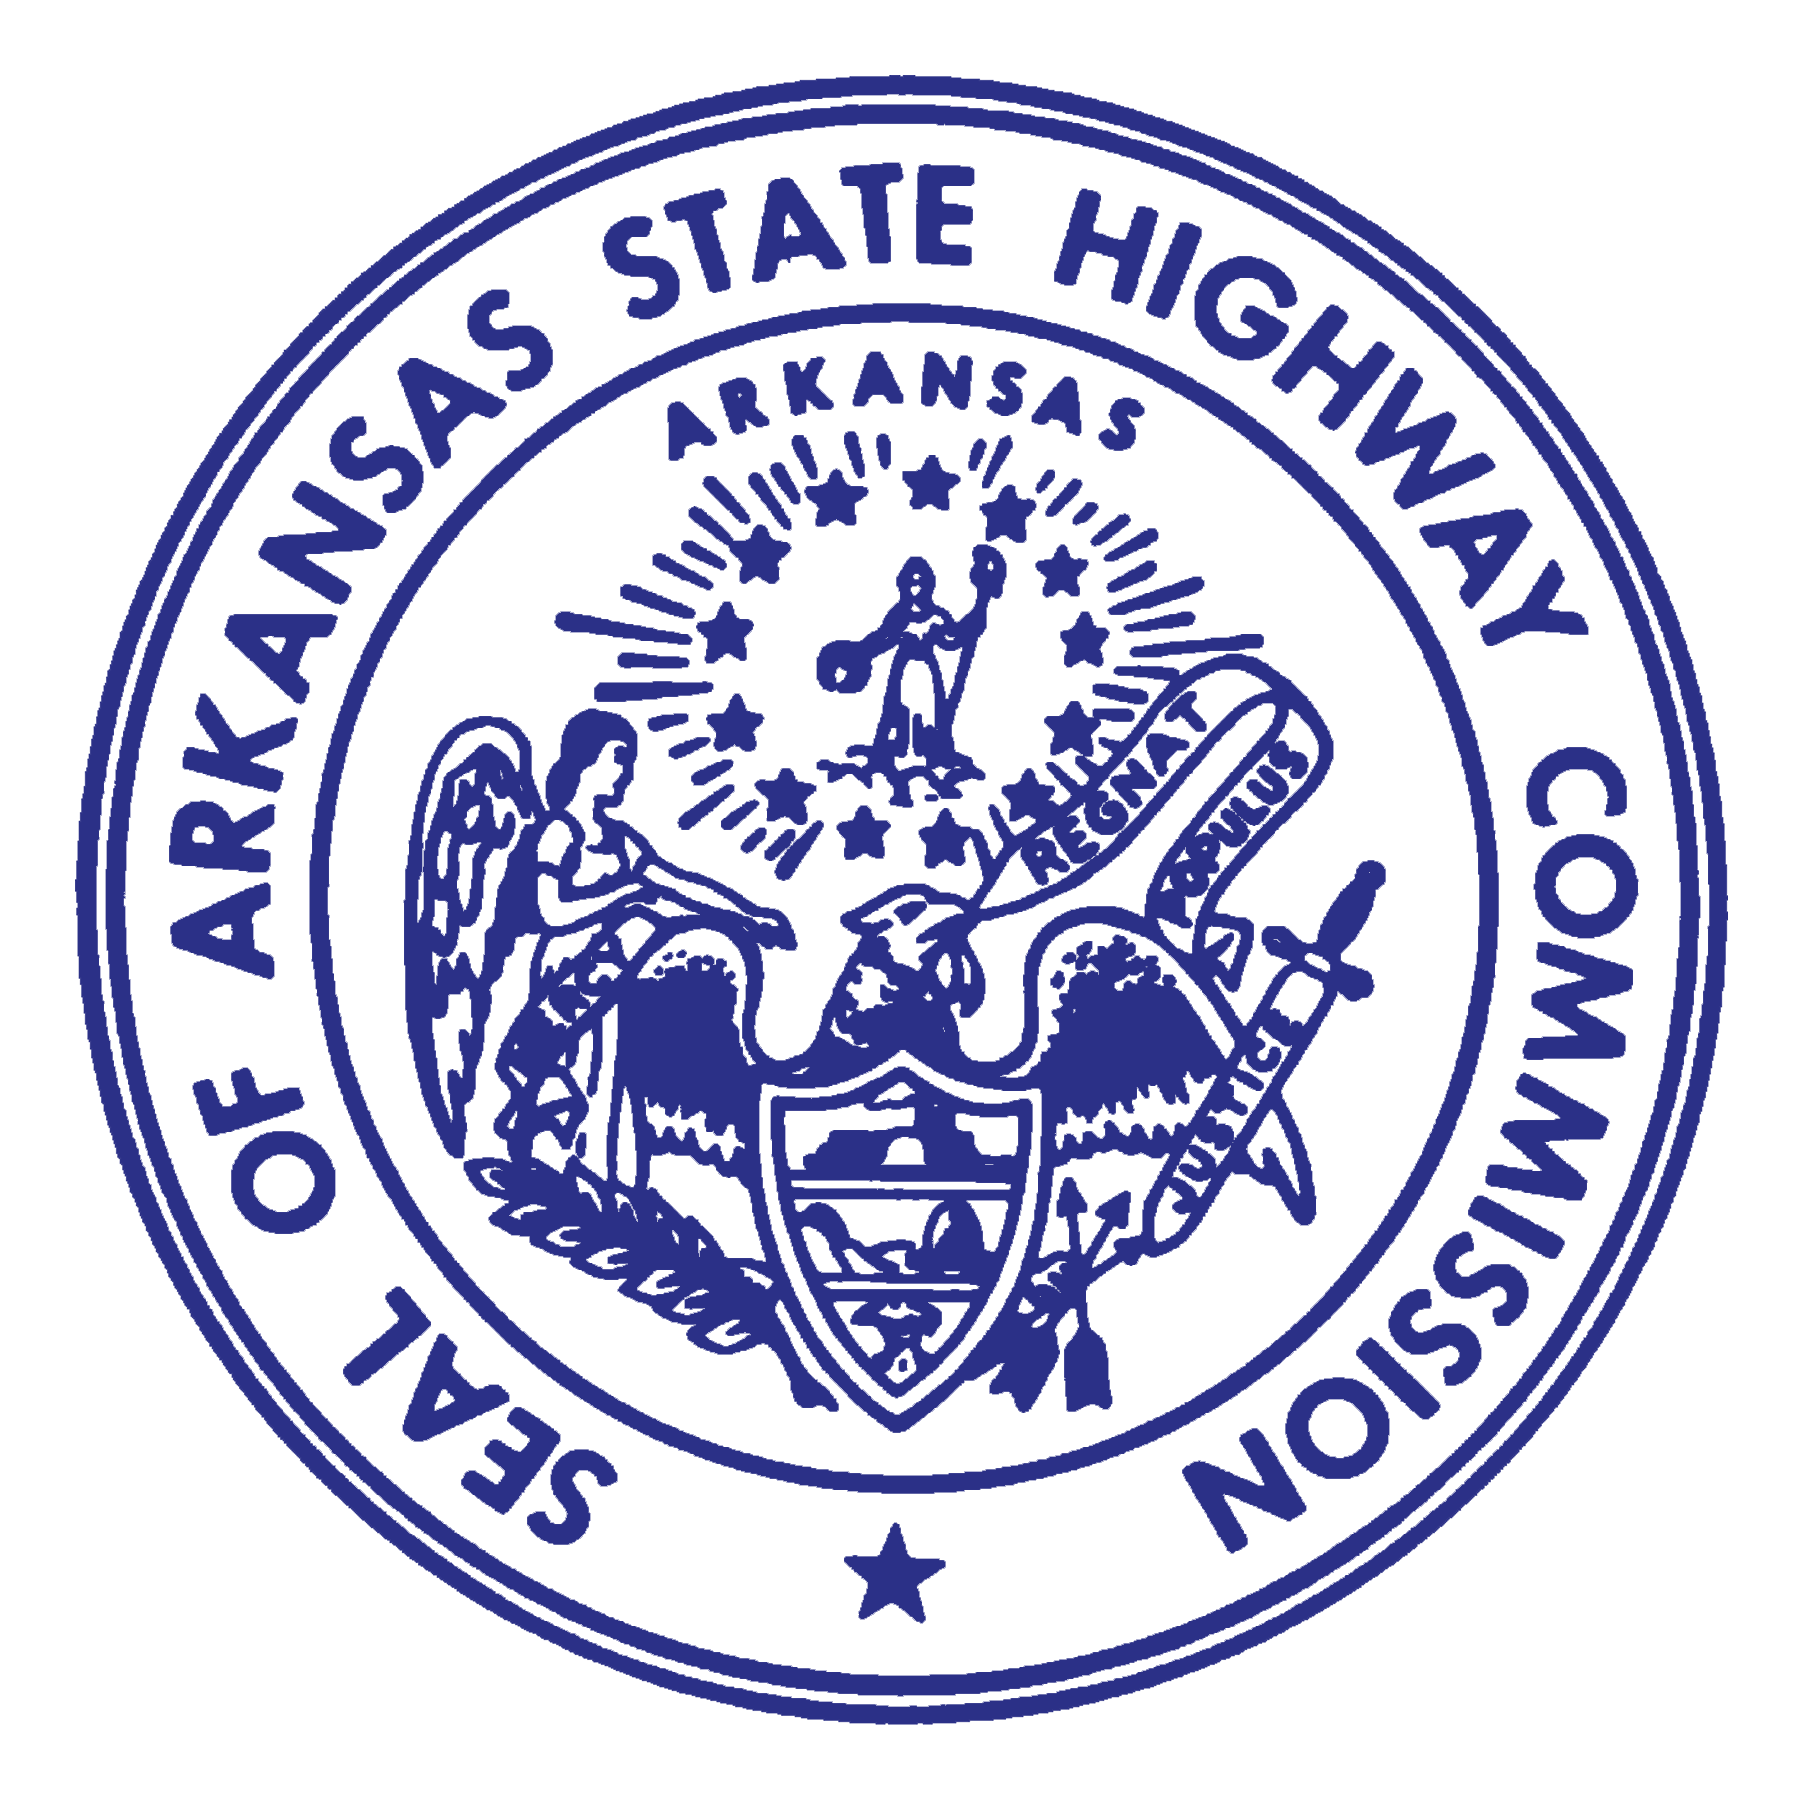 Arkansas State Highway and Transportation 50th Commission